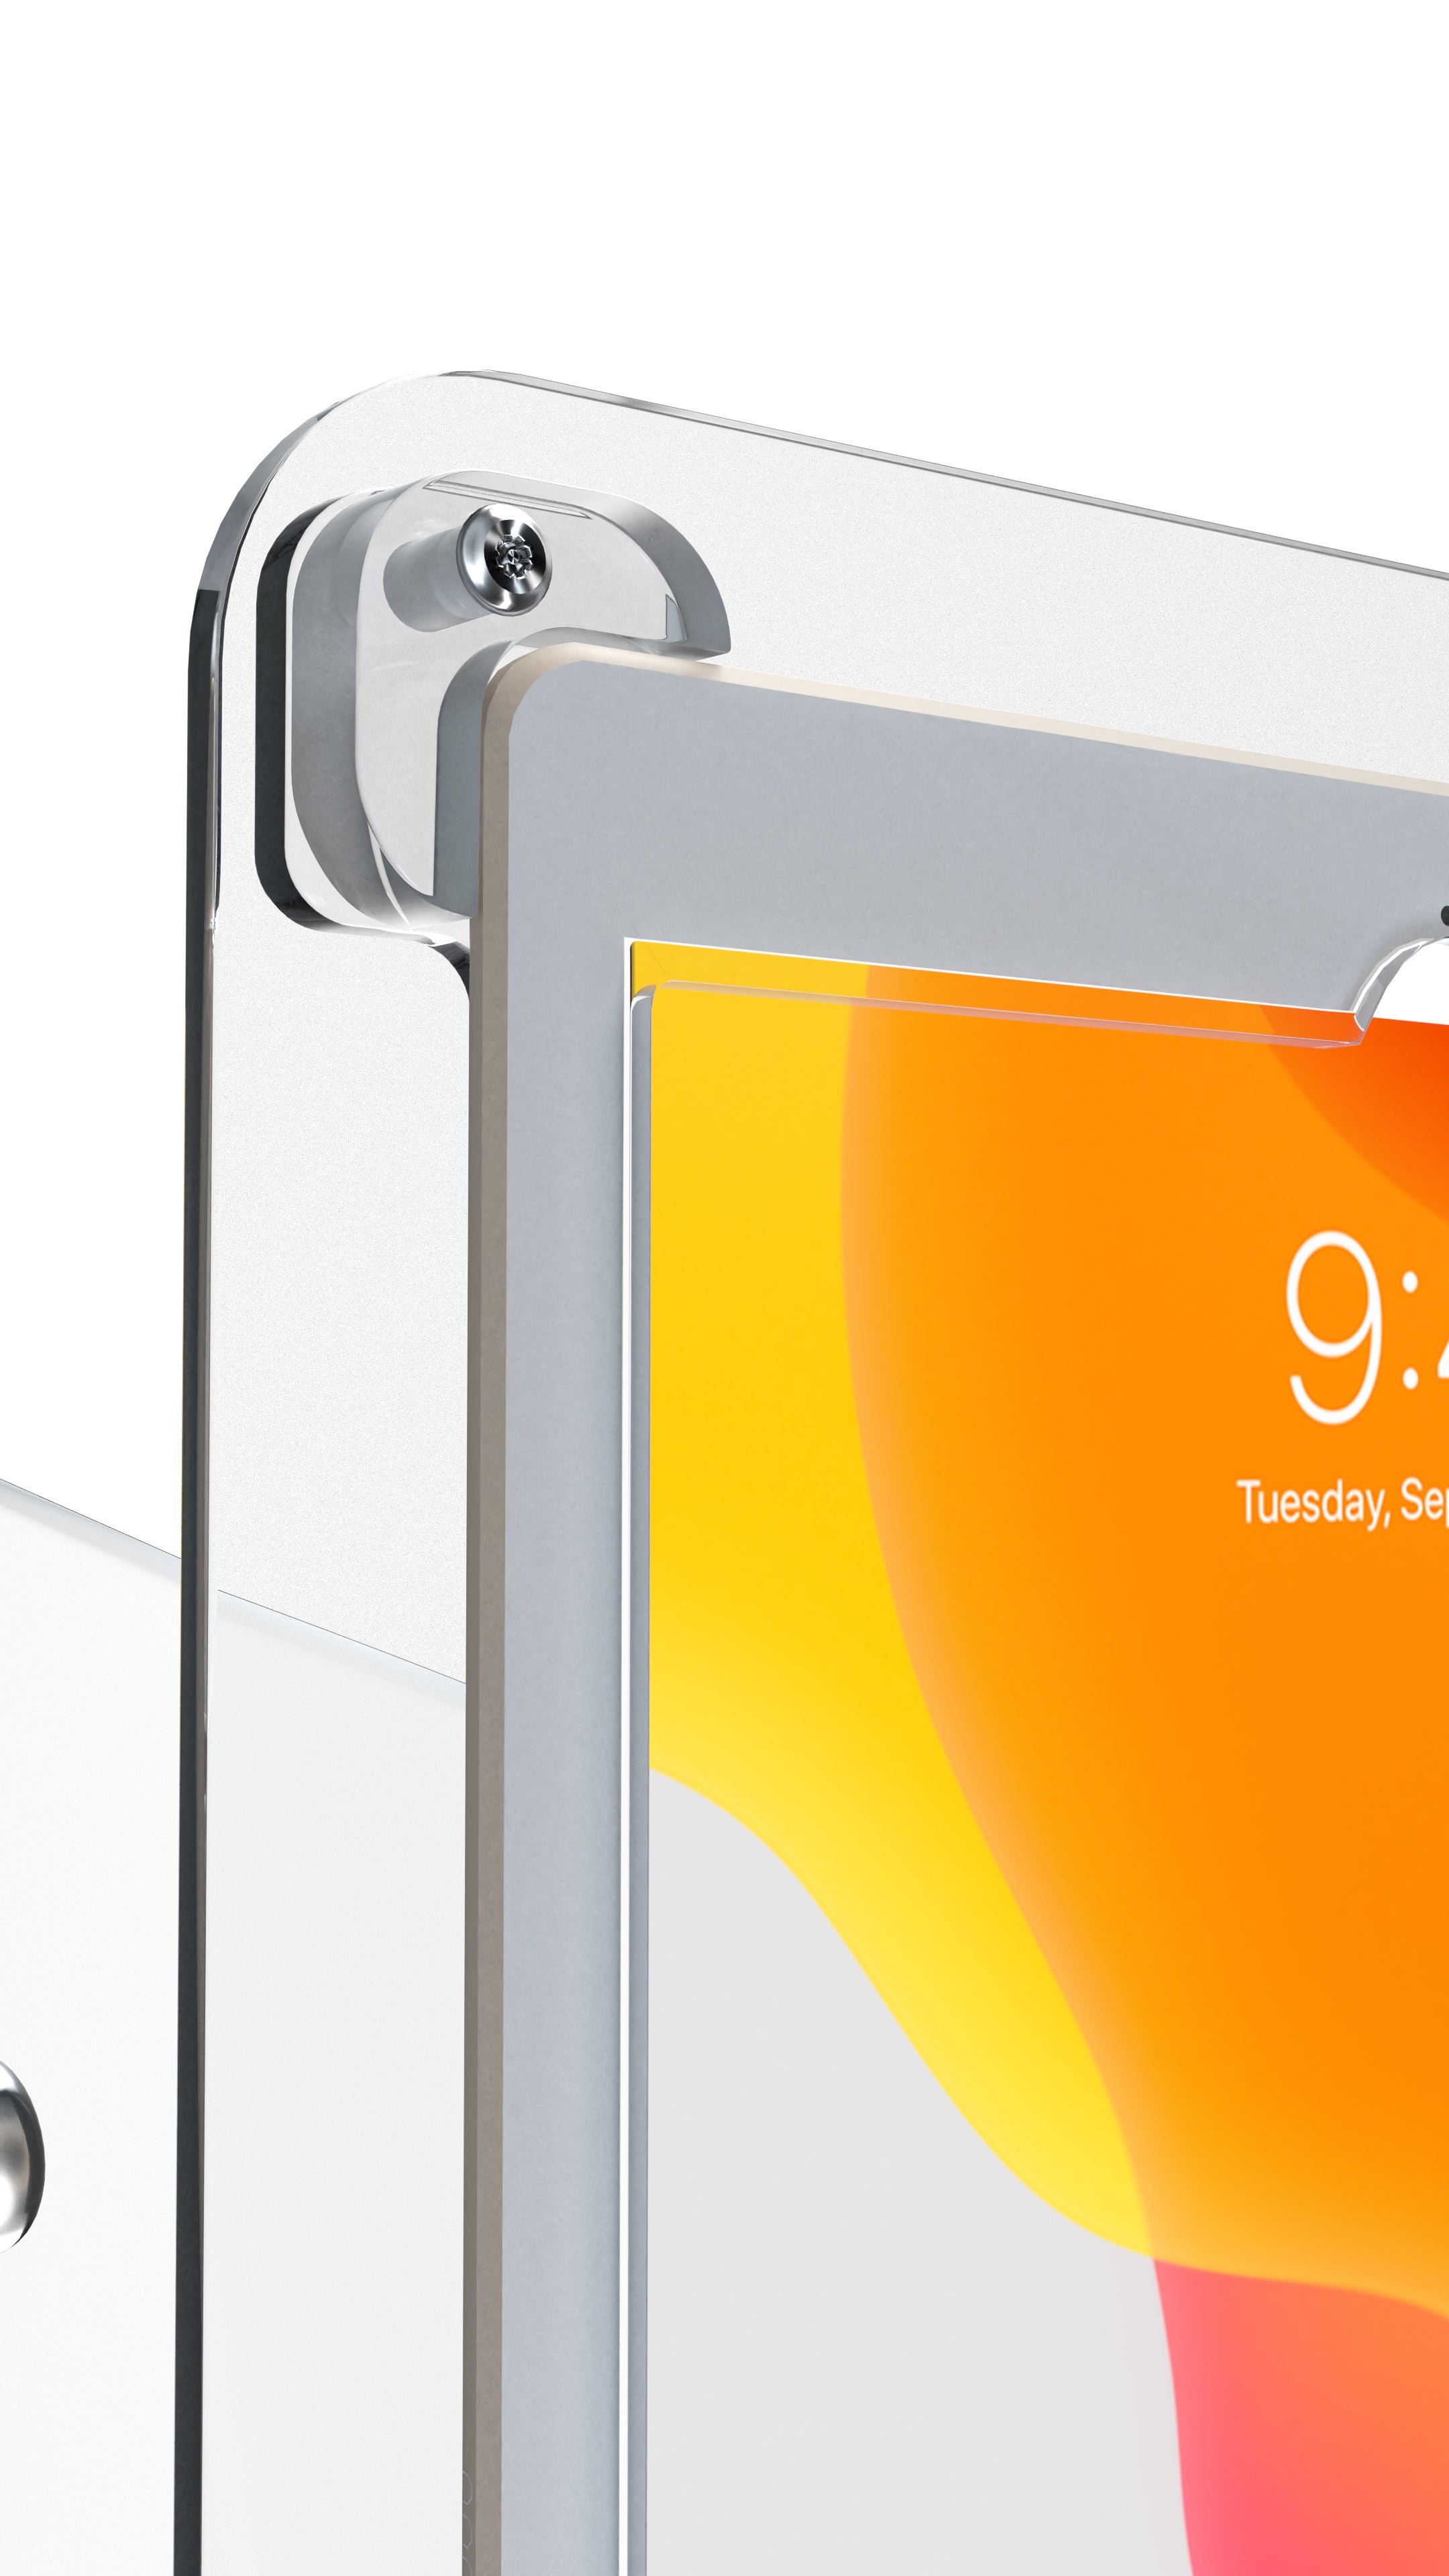 Premium Security Translucent Acrylic Wall Mount for 10.2-inch iPad 7th/ 8th/ 9th Gen &amp; More